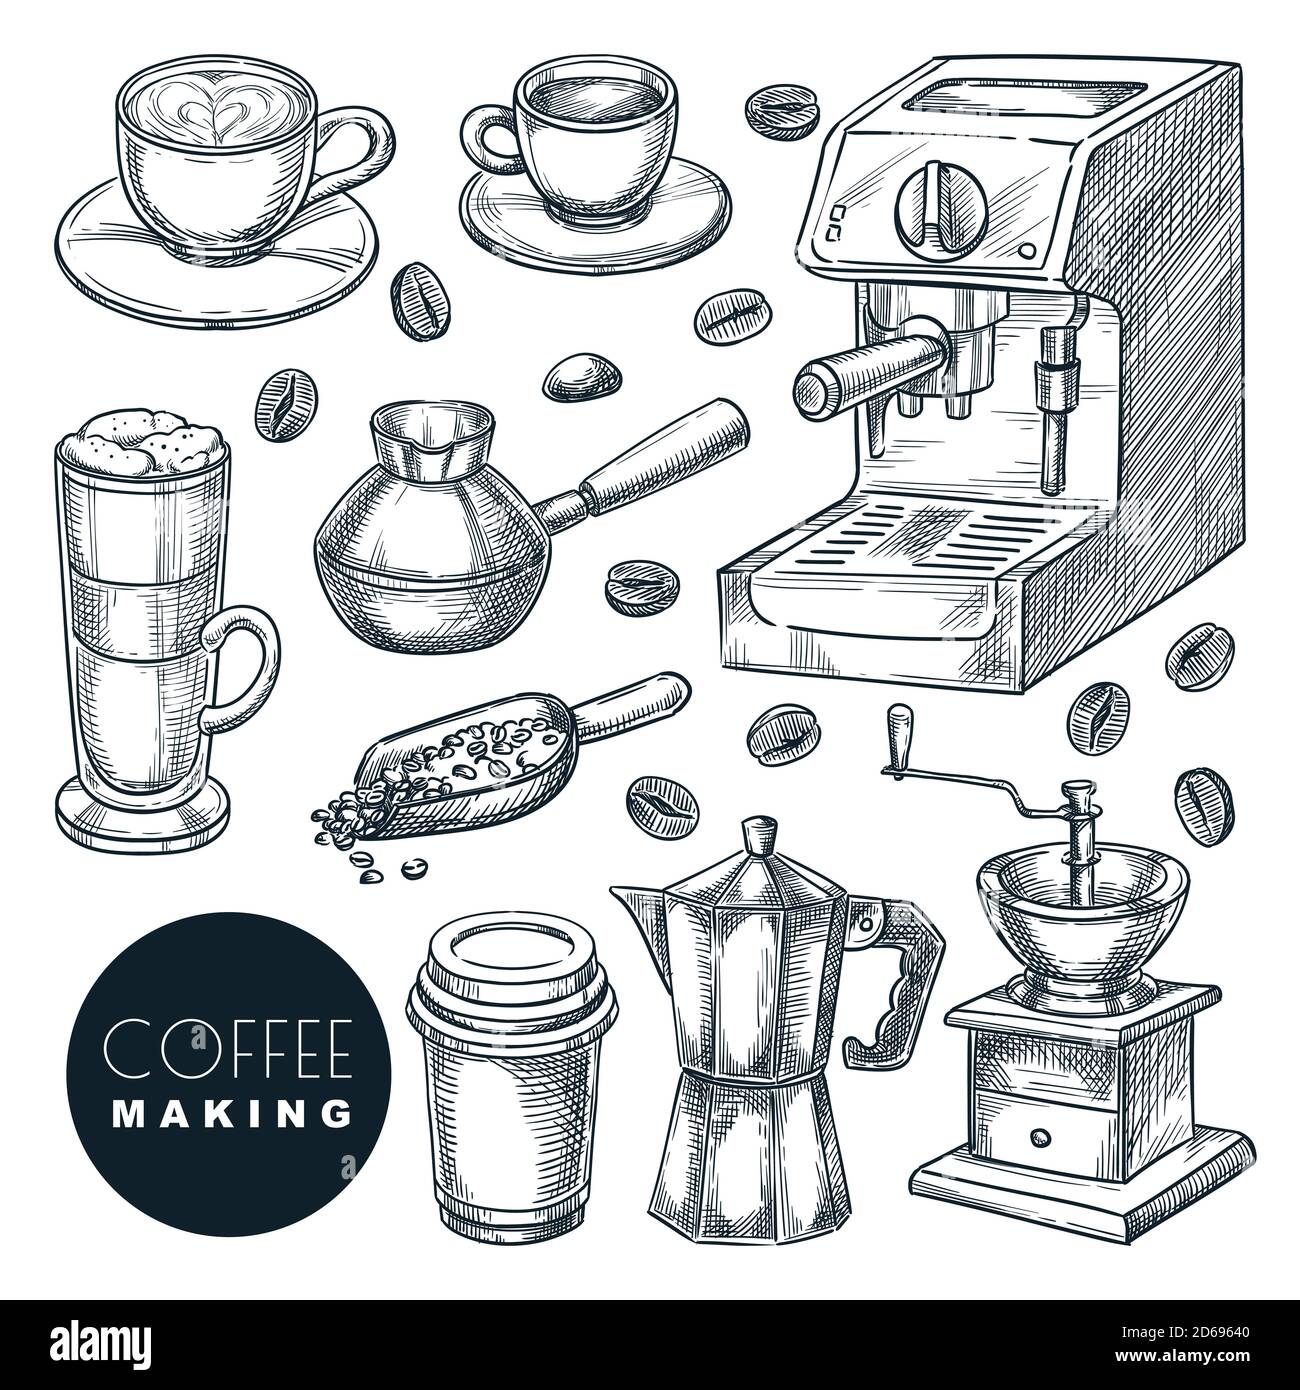 https://c8.alamy.com/comp/2D69640/coffee-making-icons-set-vector-hand-drawn-sketch-illustration-cup-with-hot-drinks-espresso-cappuccin-and-latte-isolated-on-white-background-cafe-2D69640.jpg